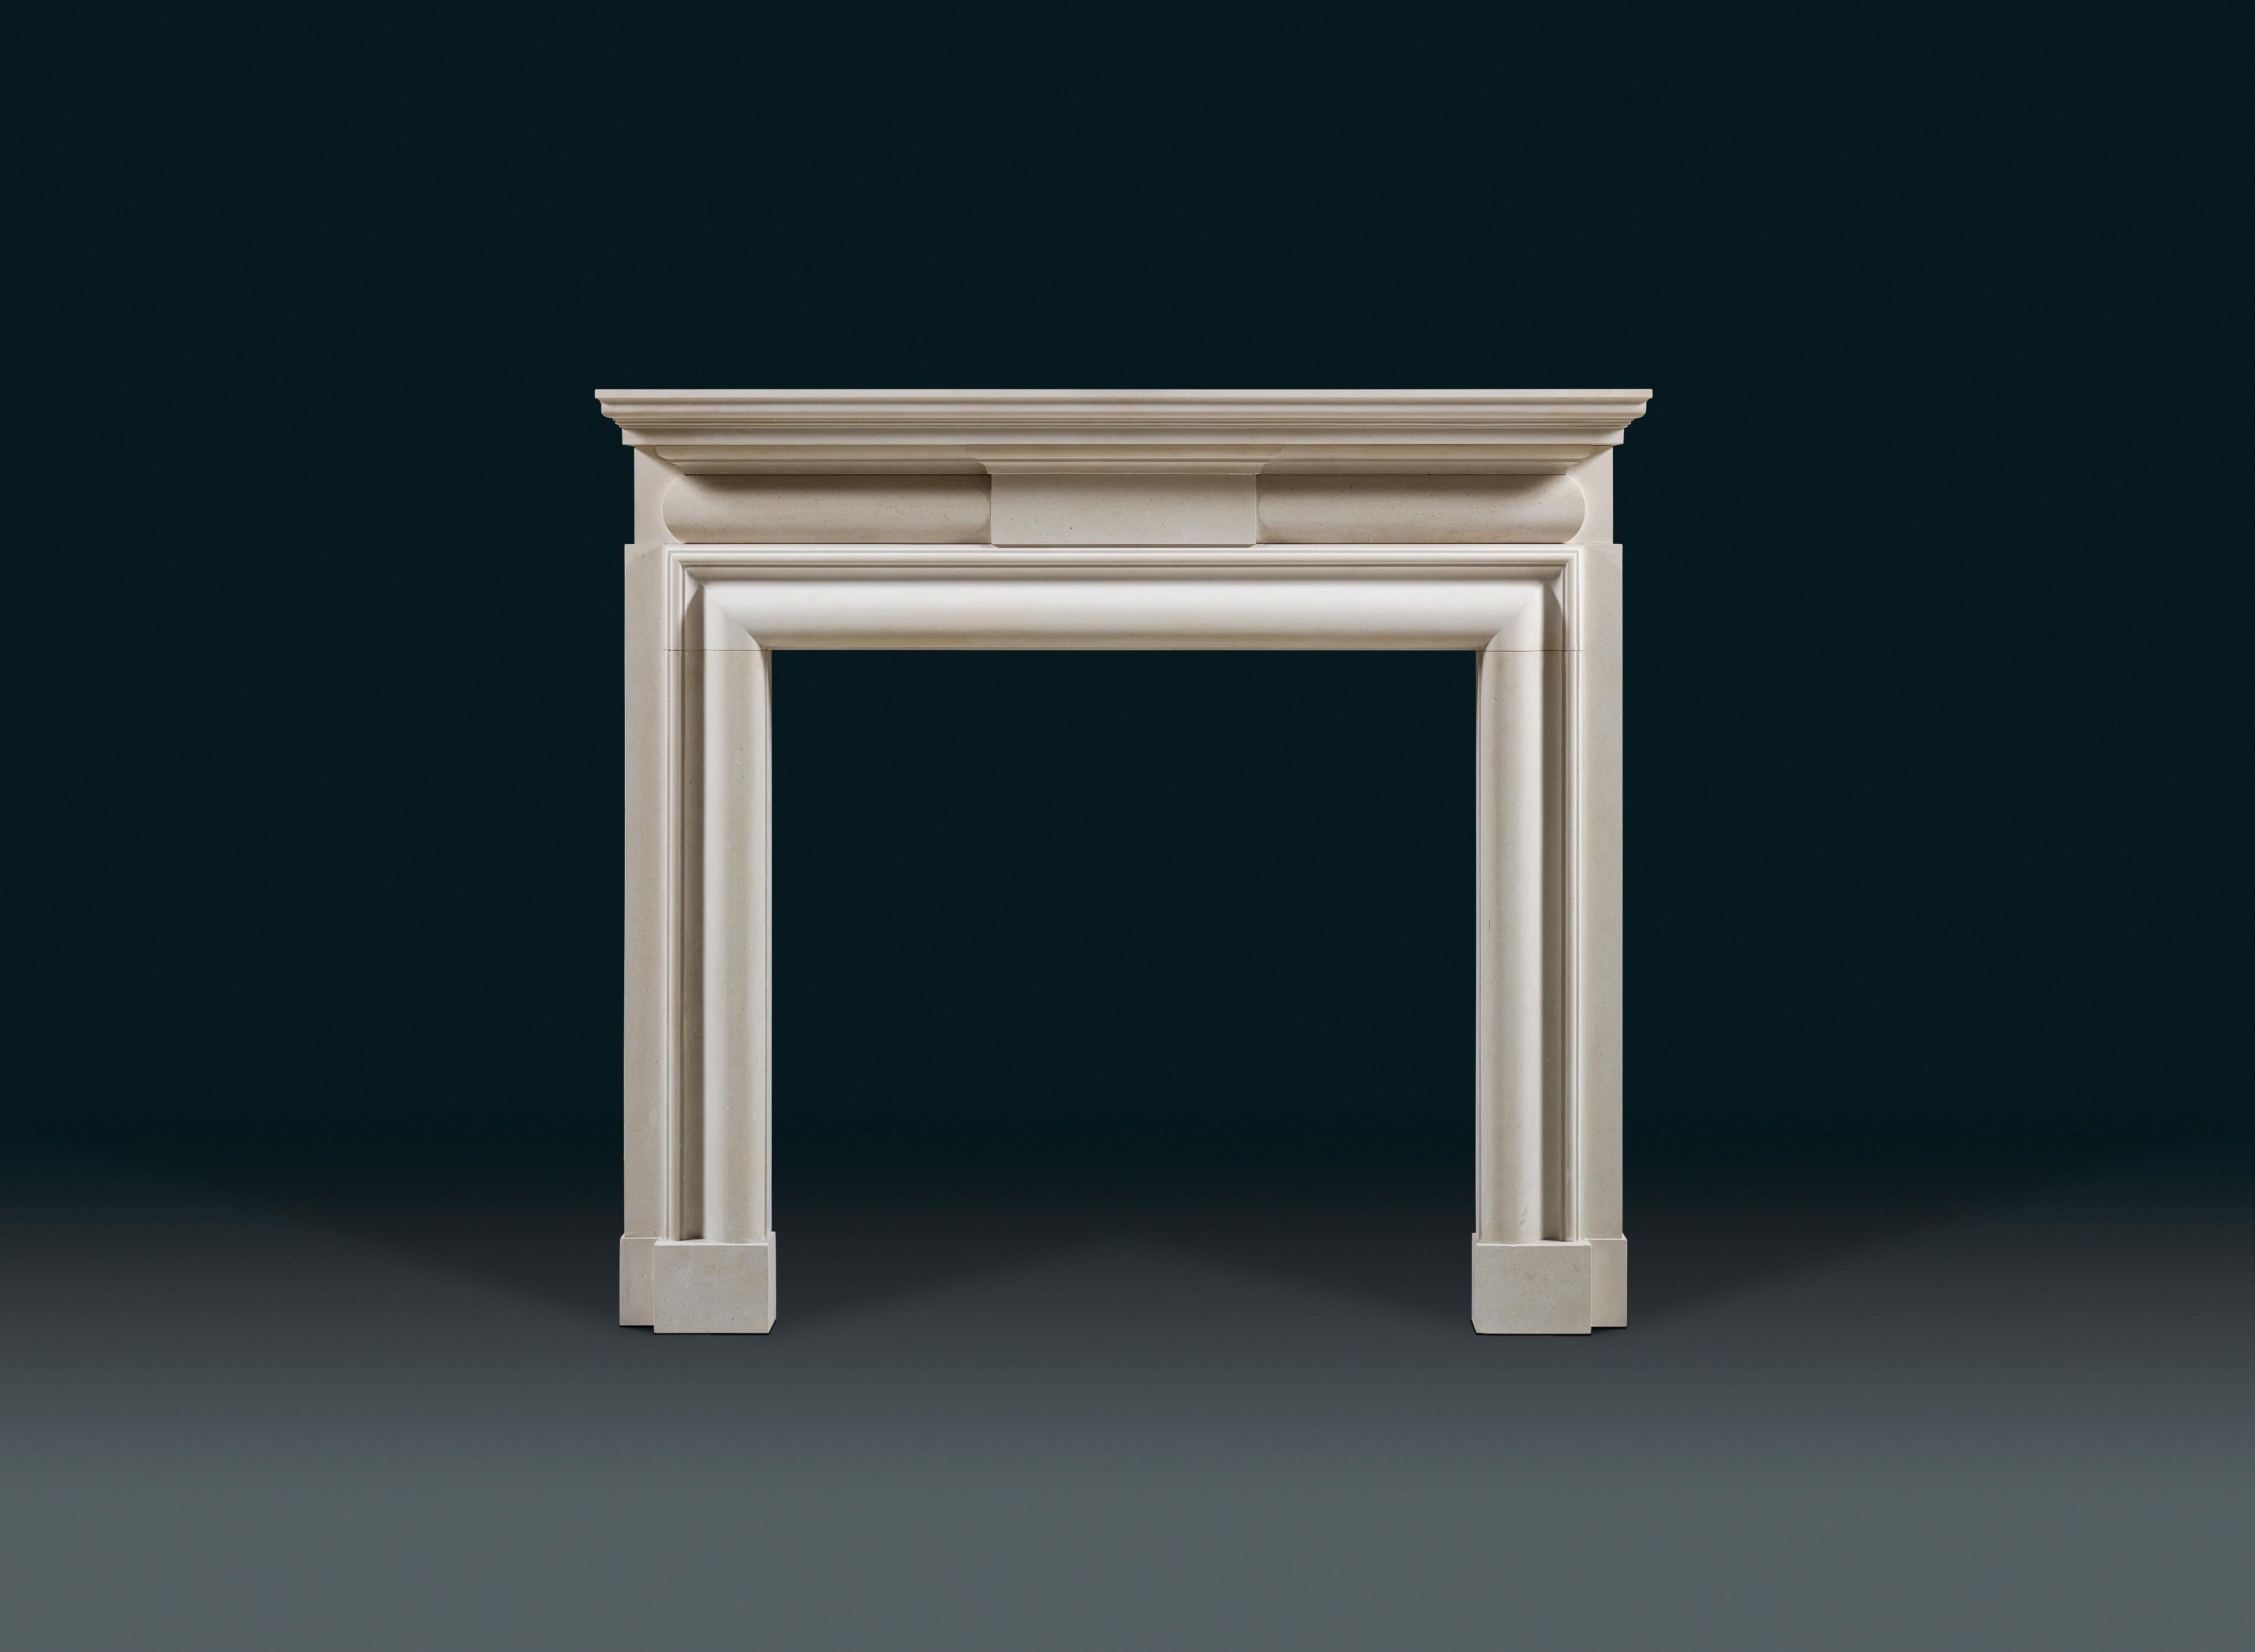 Carved Jamb Lutyens Bolection Reproduction Georgian Chimneypiece Is Portland Stone For Sale